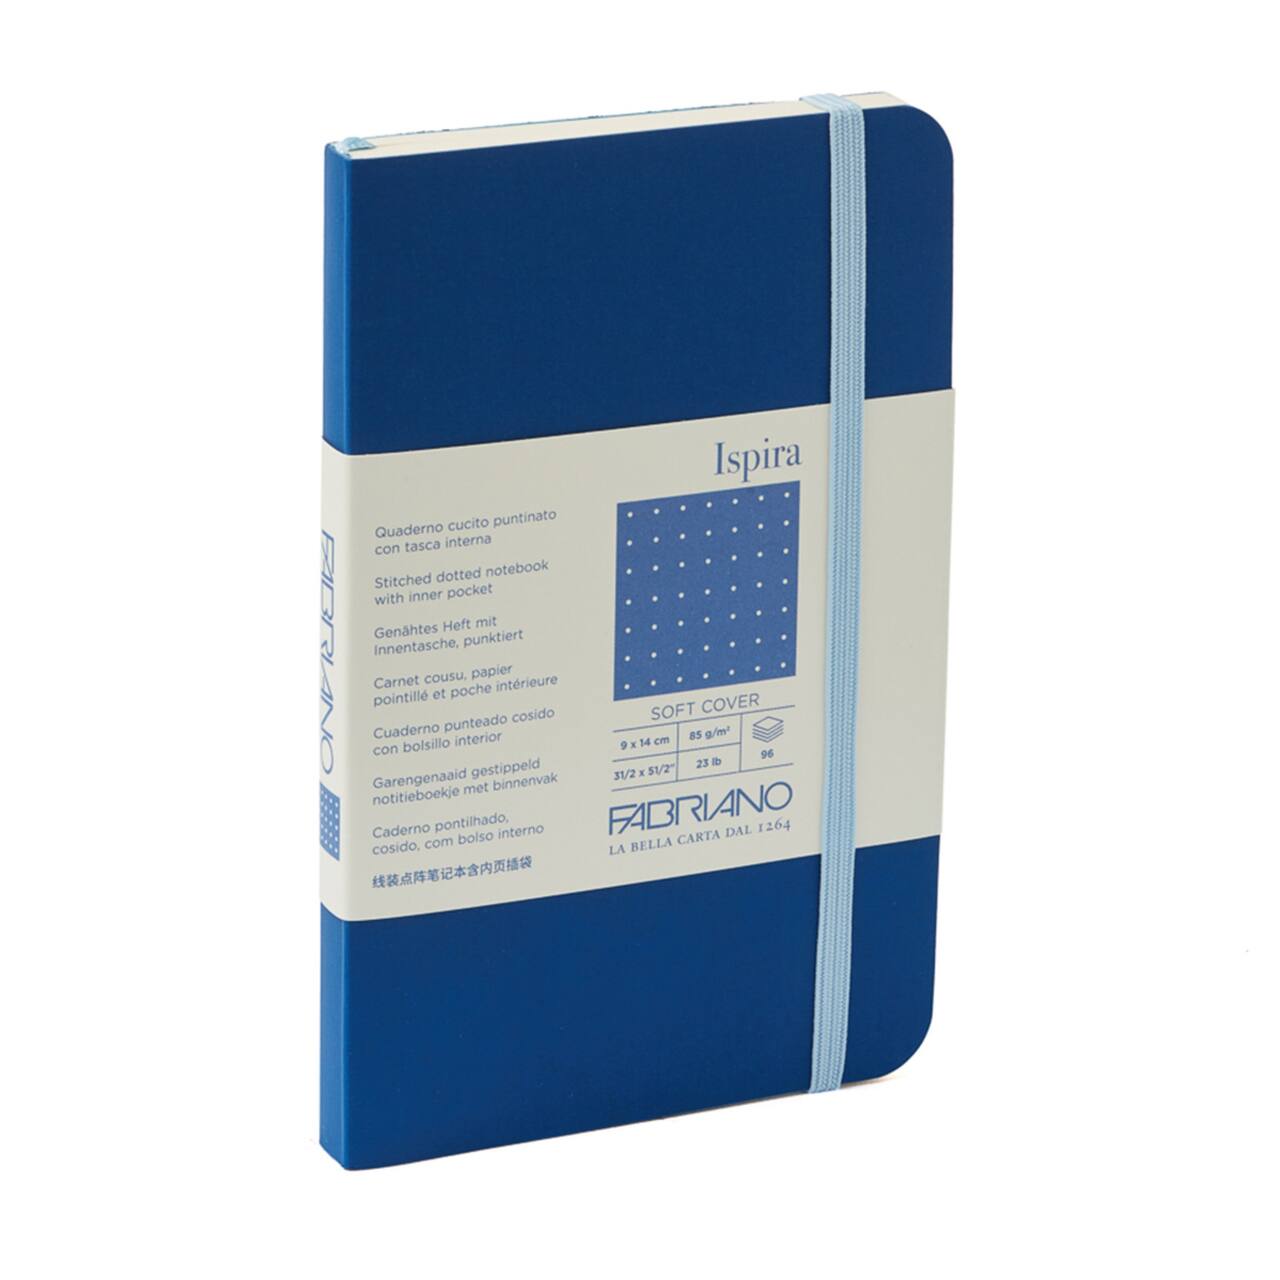 Fabriano&#xAE; Ispira Dotted Softcover Notebook